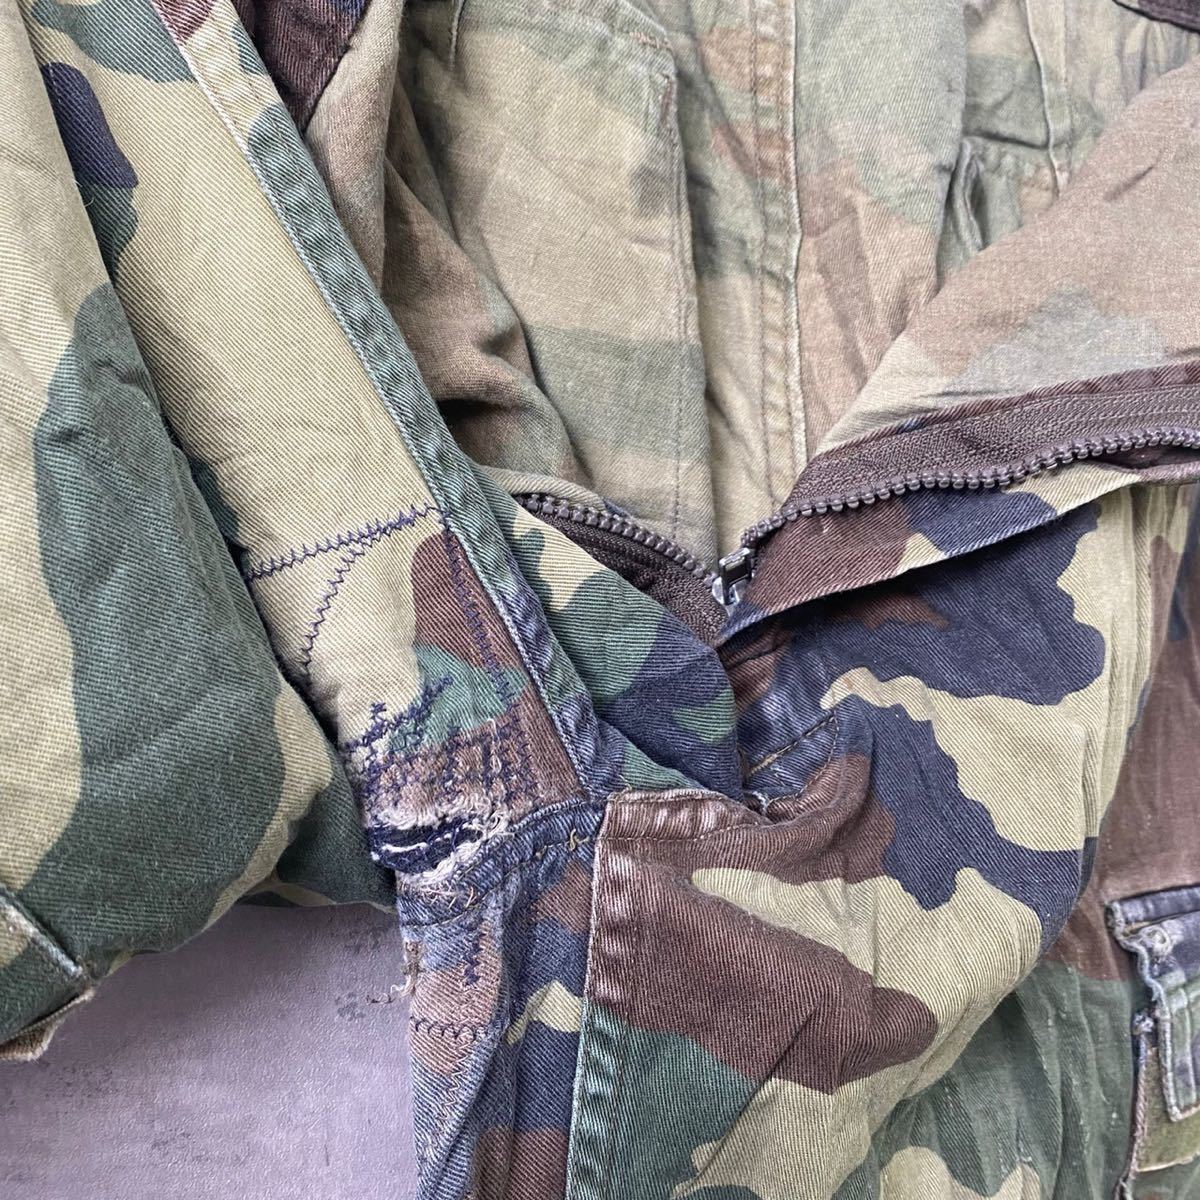  cargo pants camouflage camouflage military army bread absolute size W31in USA abroad import old clothes S220625-N759